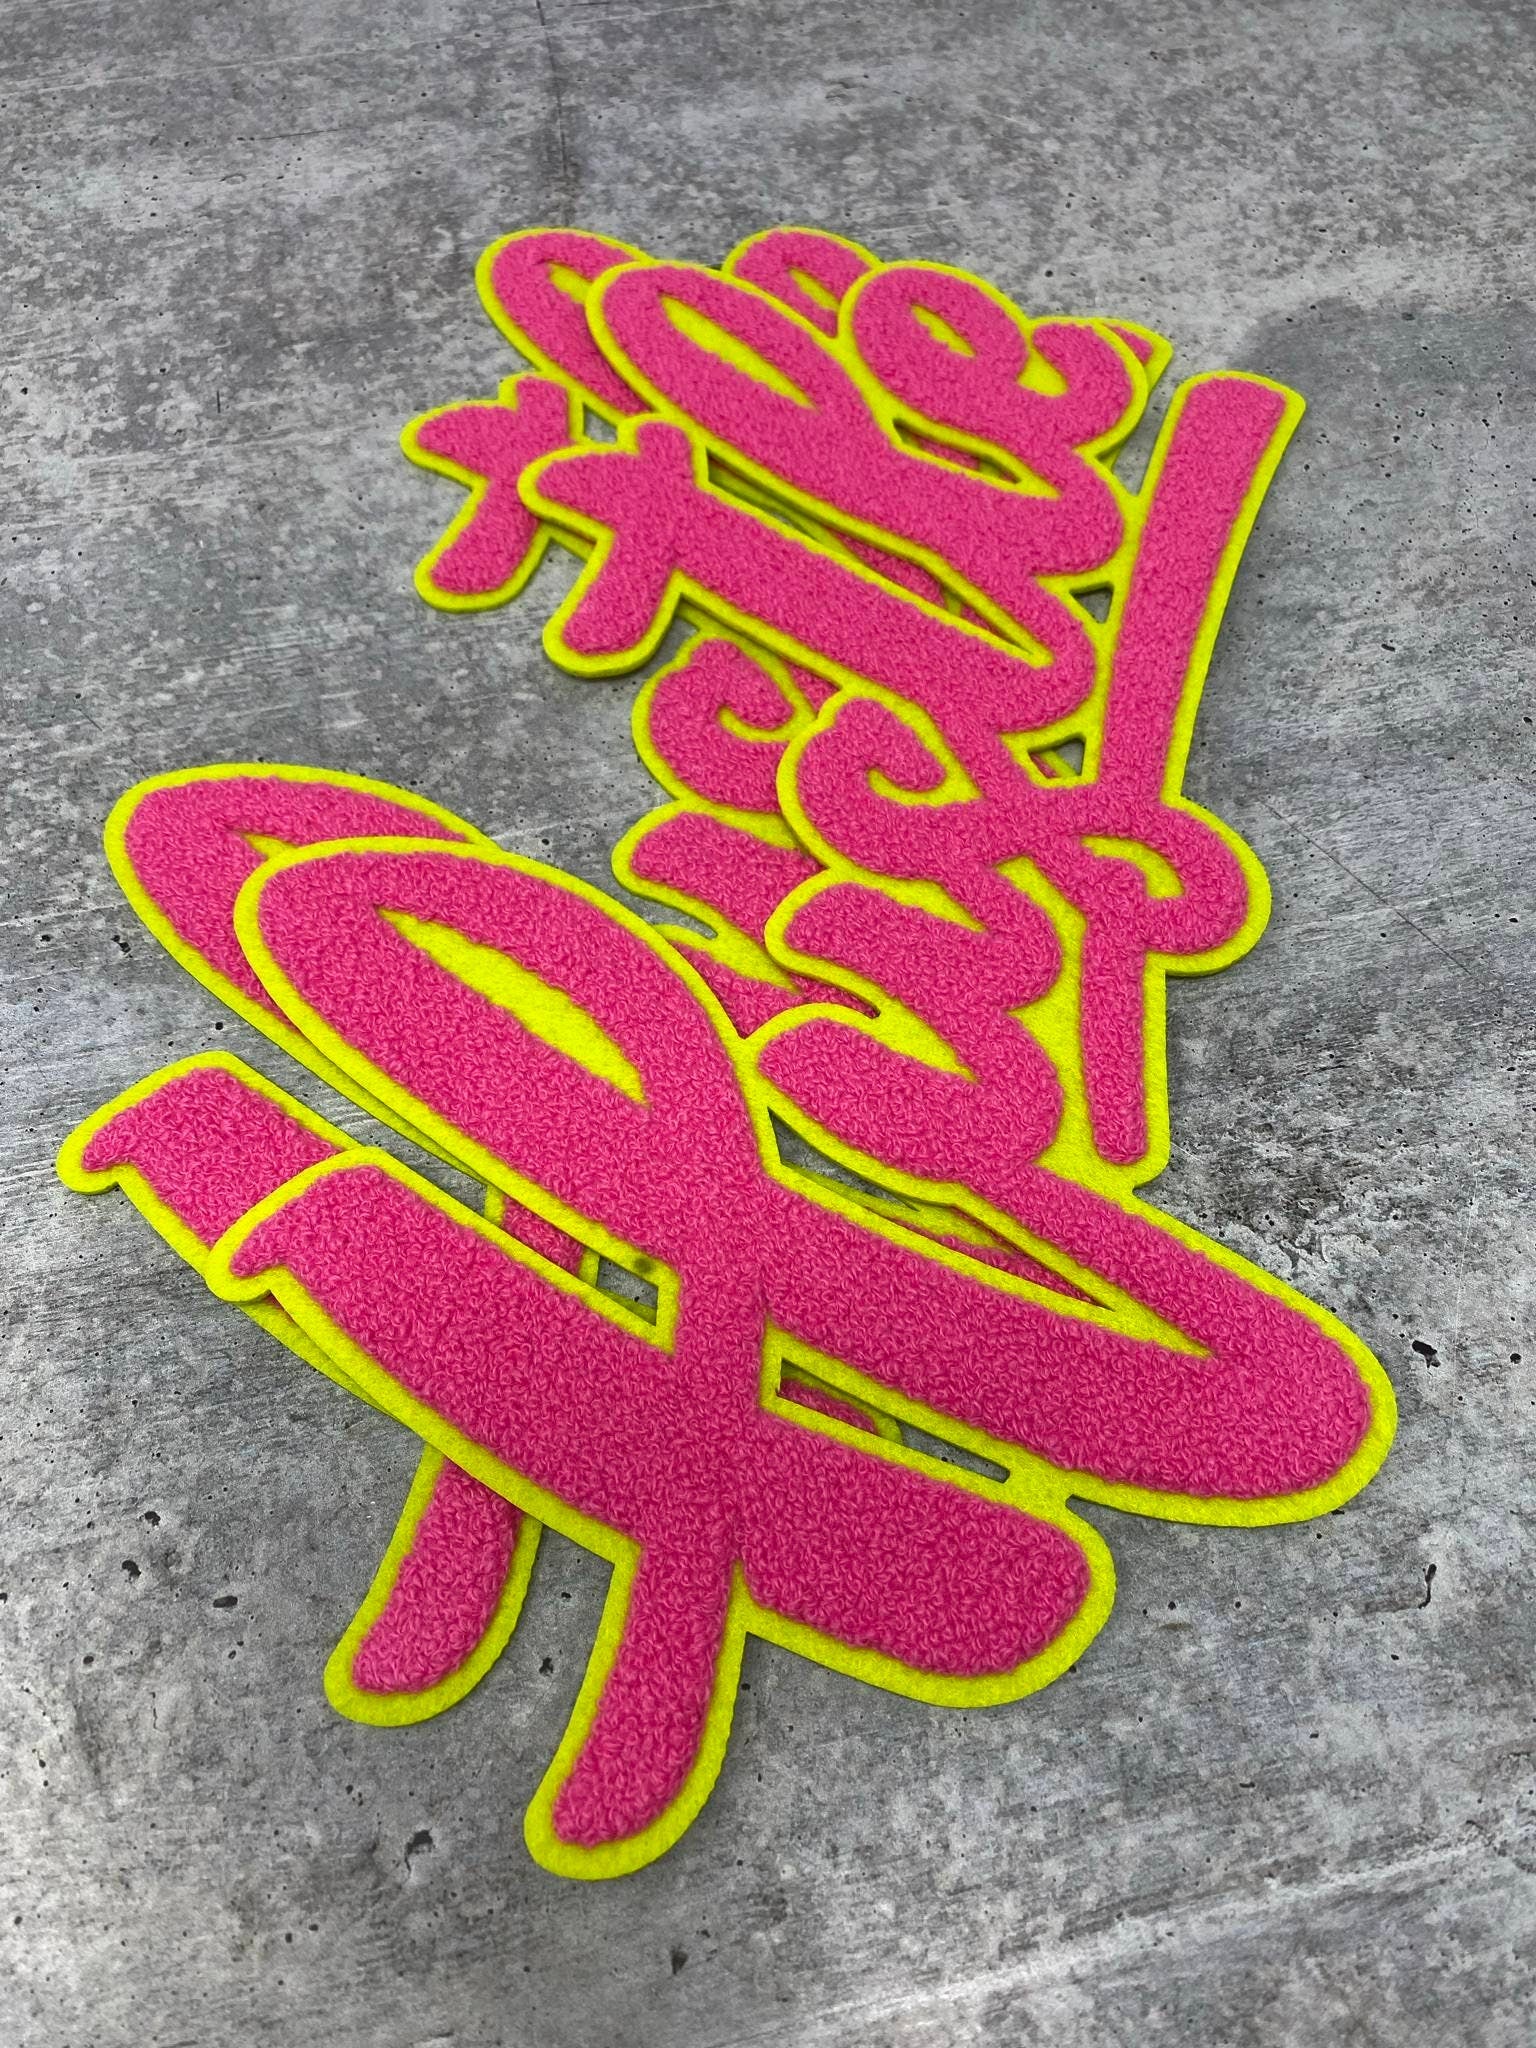 Exclusive, HOTT Pink & Green "Hustle" Chenille Patch (iron-on) Size 10"x8", Varsity Patch for Denim Jacket, Shirts and Hoodies, Large Patch